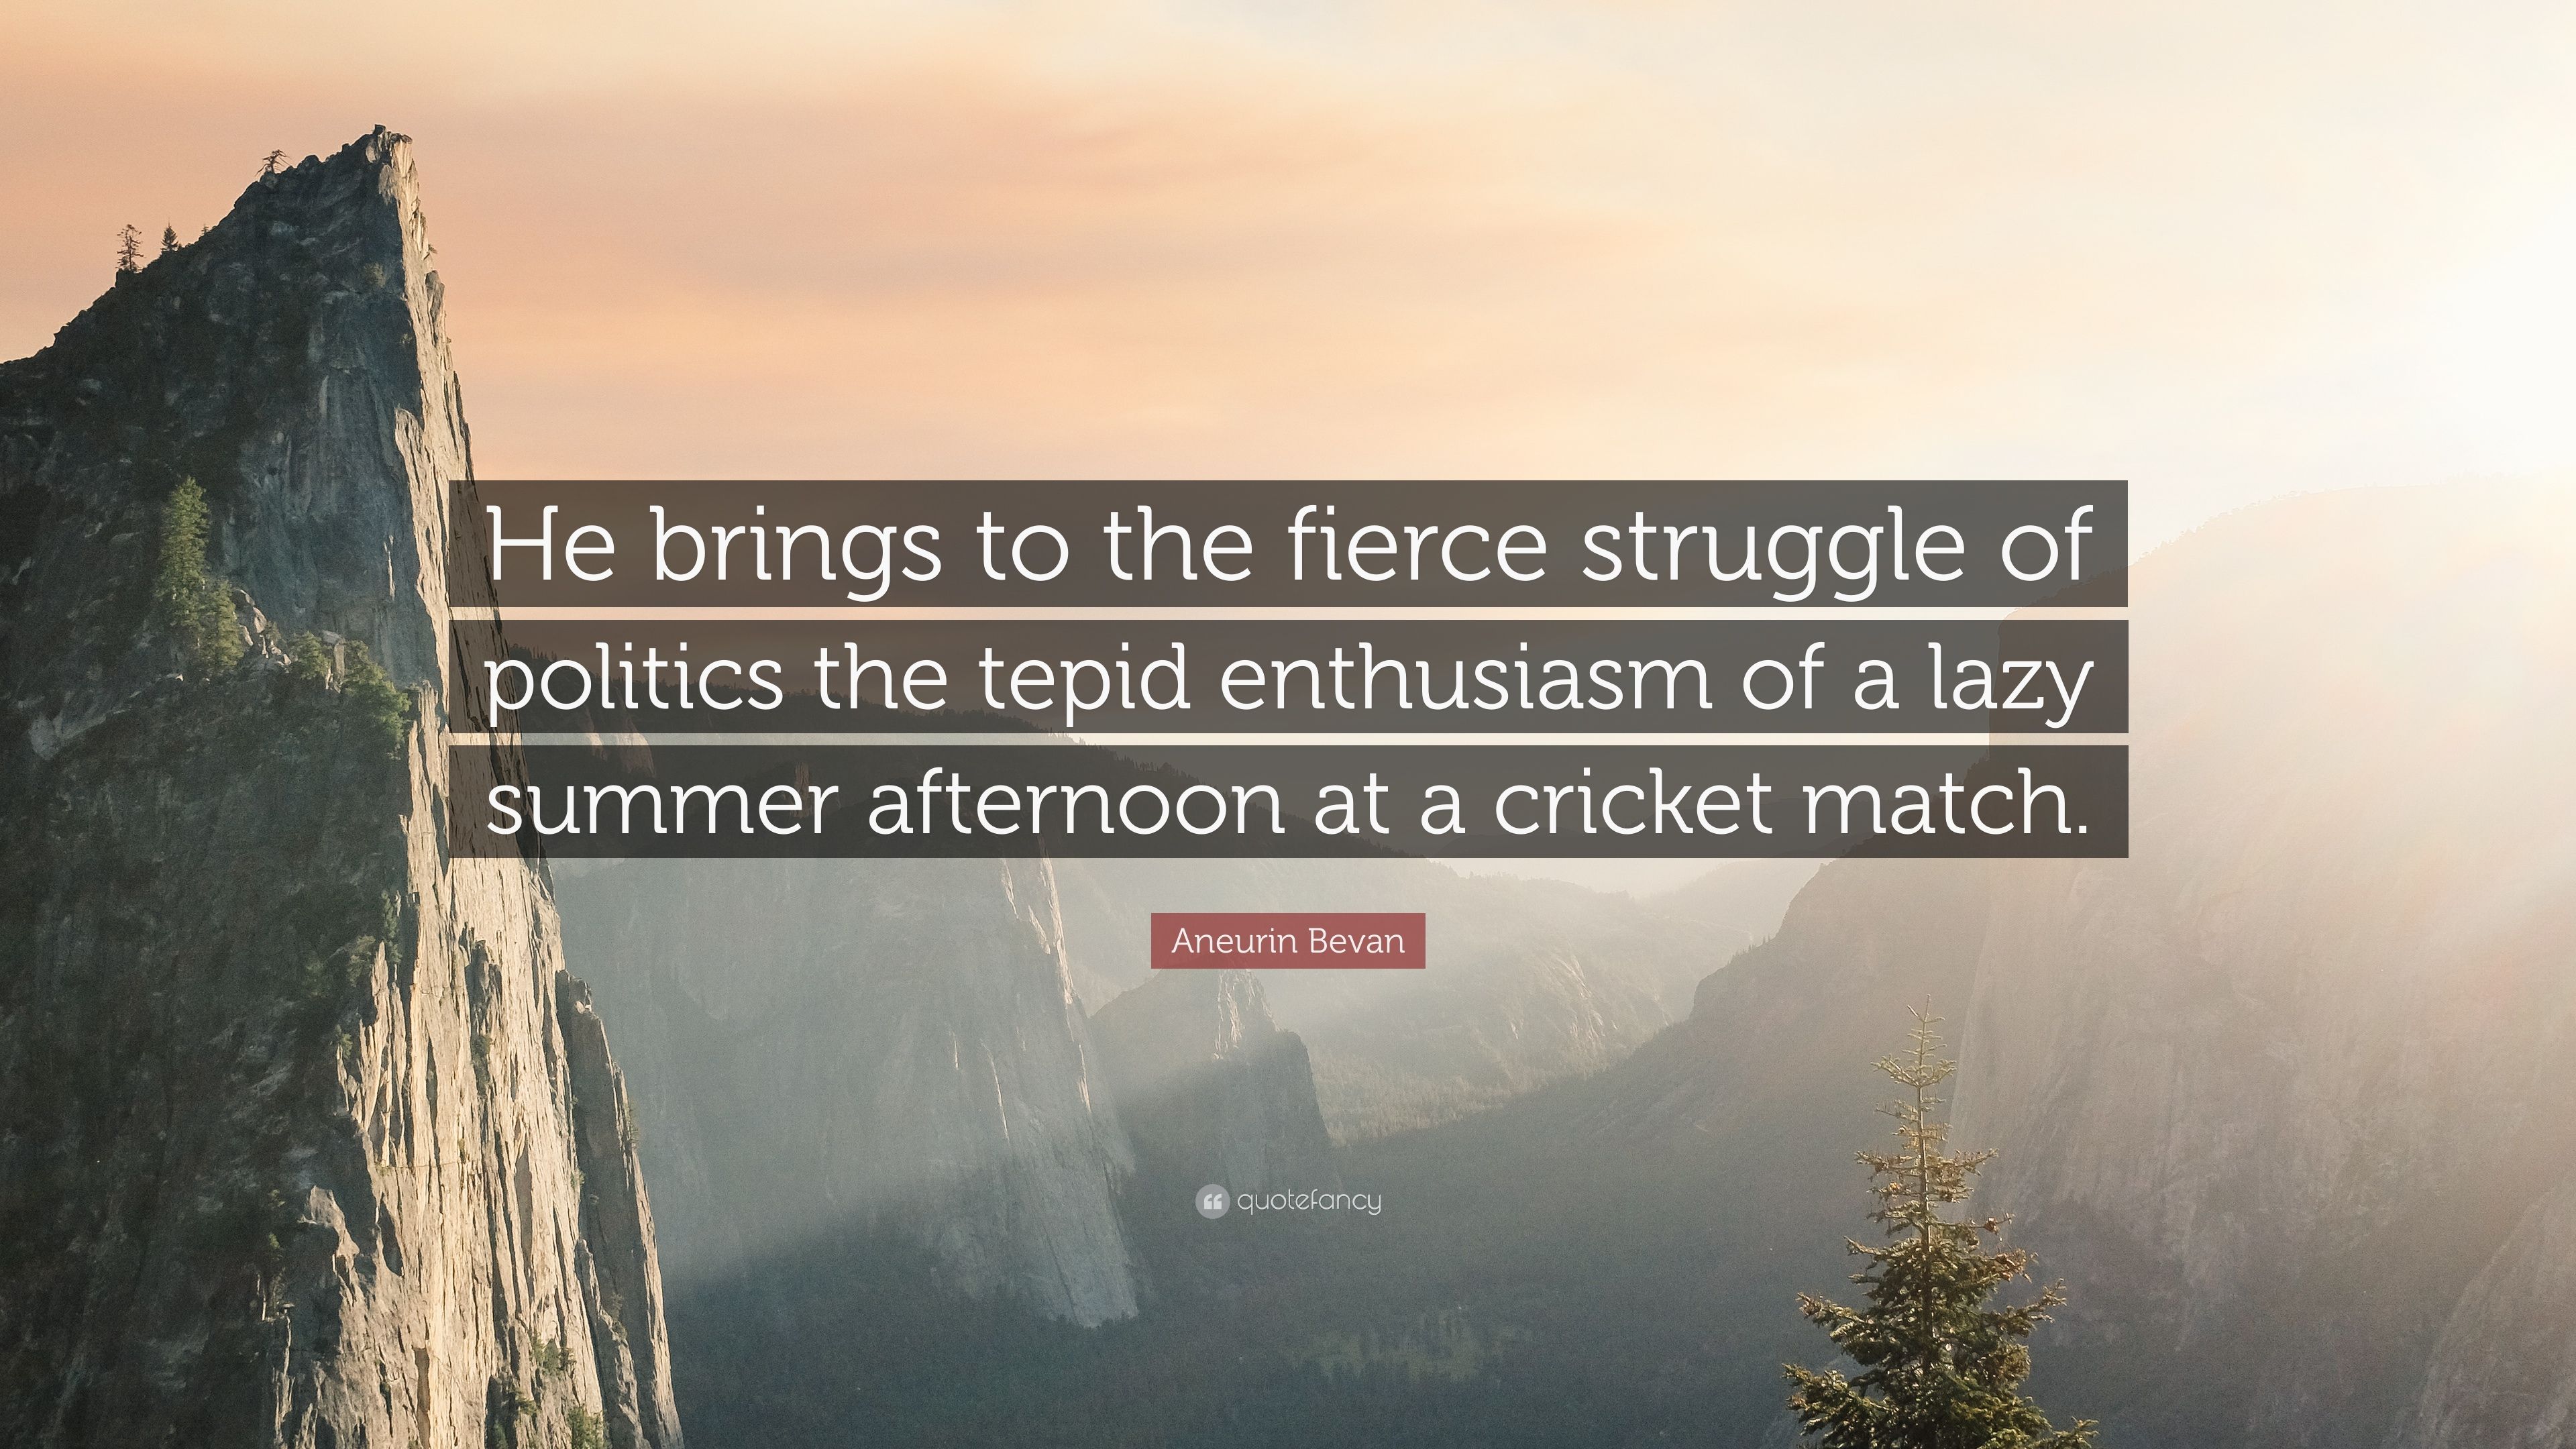 Aneurin Bevan Quote: “He brings to the fierce struggle of politics